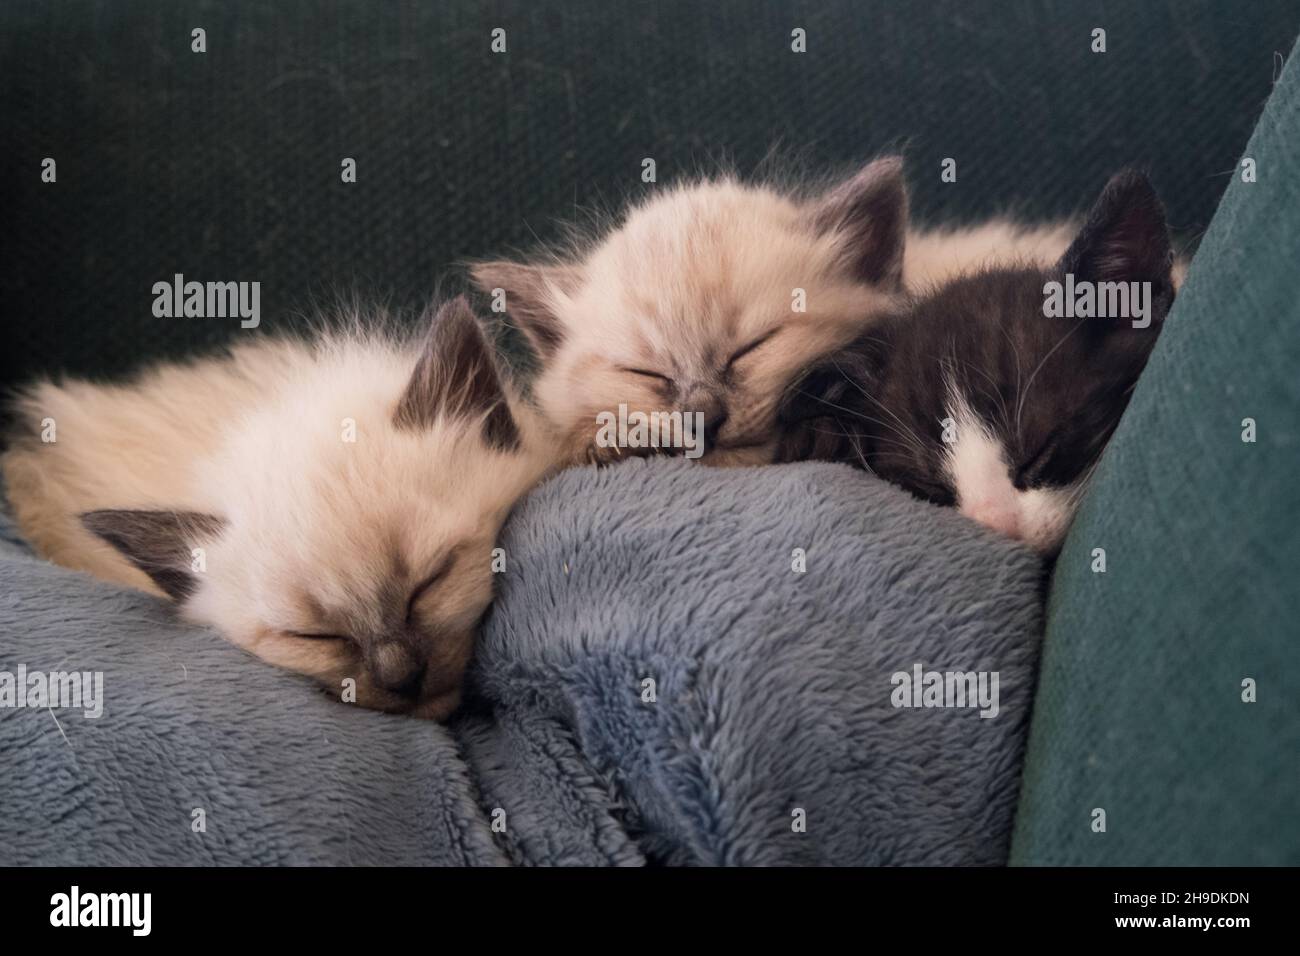 Three tiny kittens sleeping on a couch Stock Photo